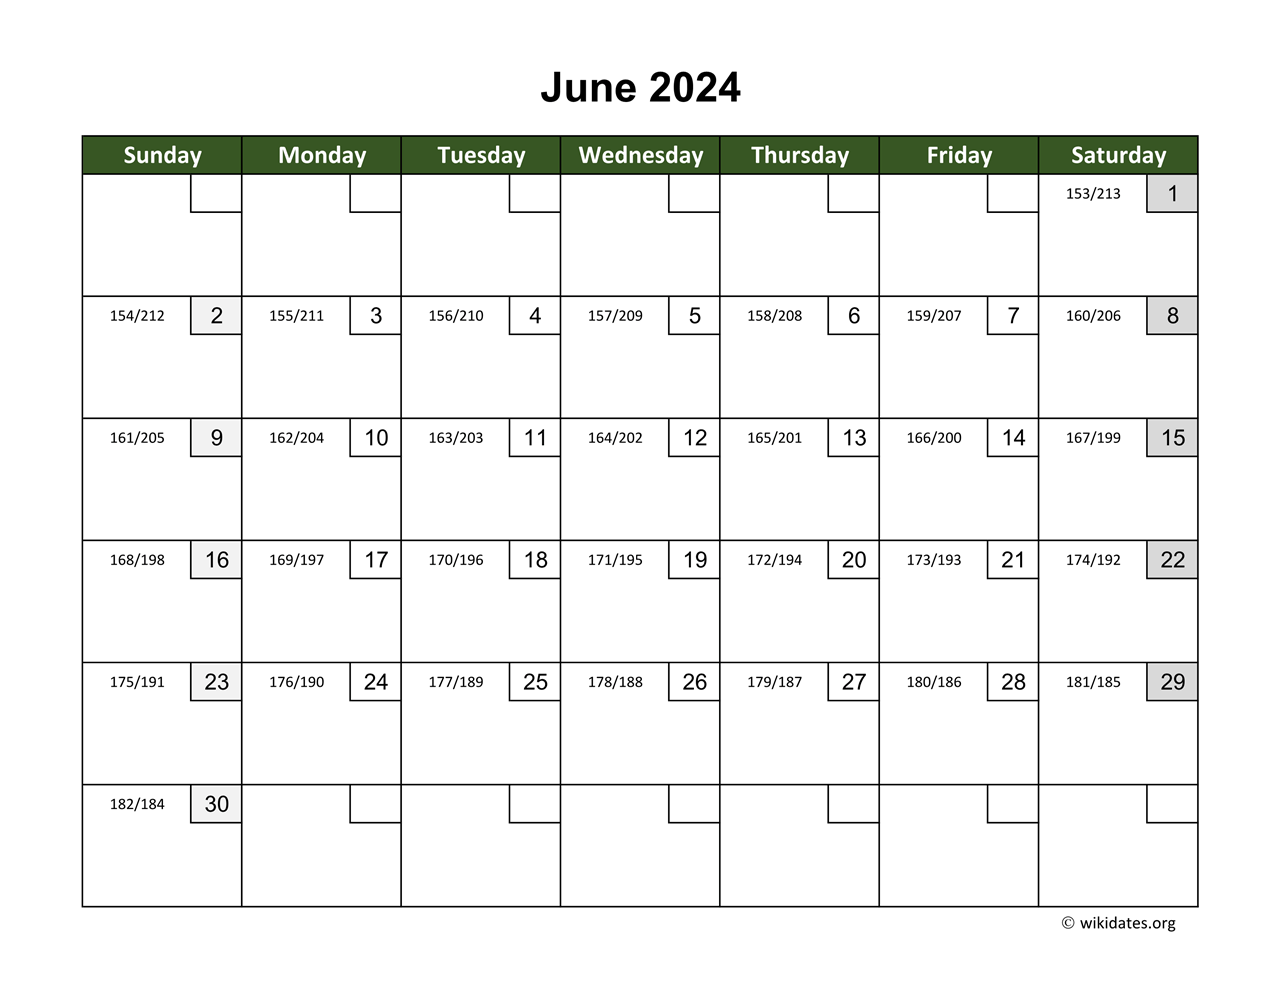 June 2024 Calendar with Day Numbers  WikiDates.org